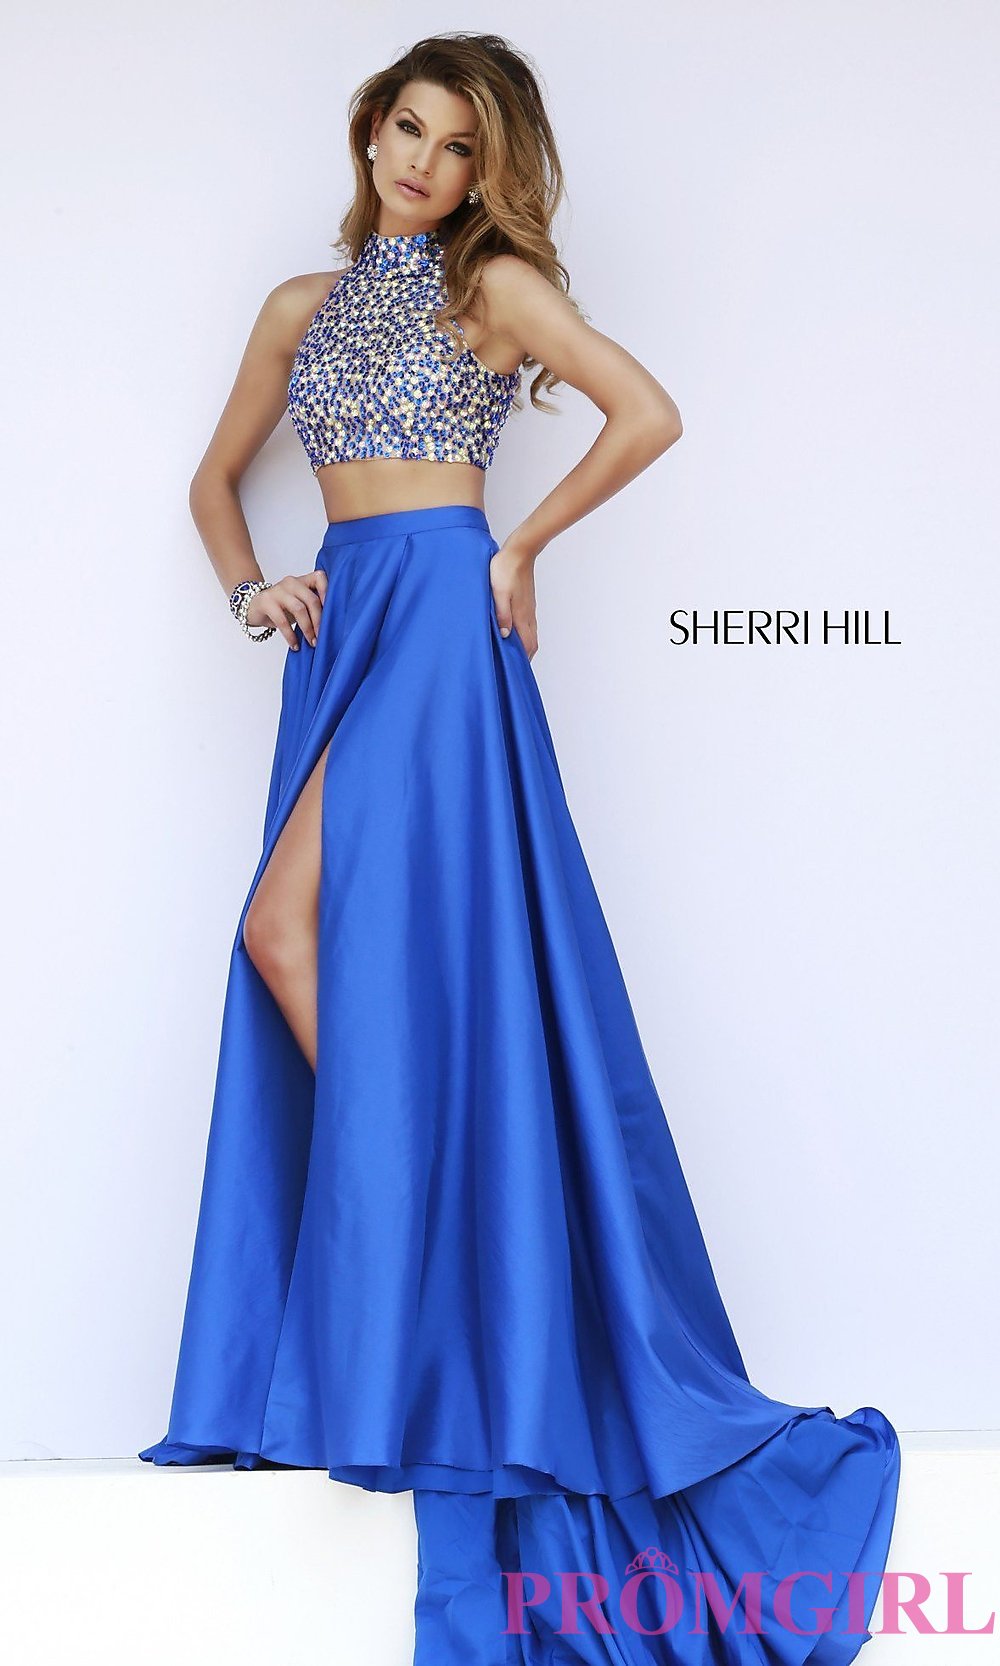 Cheap Prom Dresses Two Piece - Trends For Fall